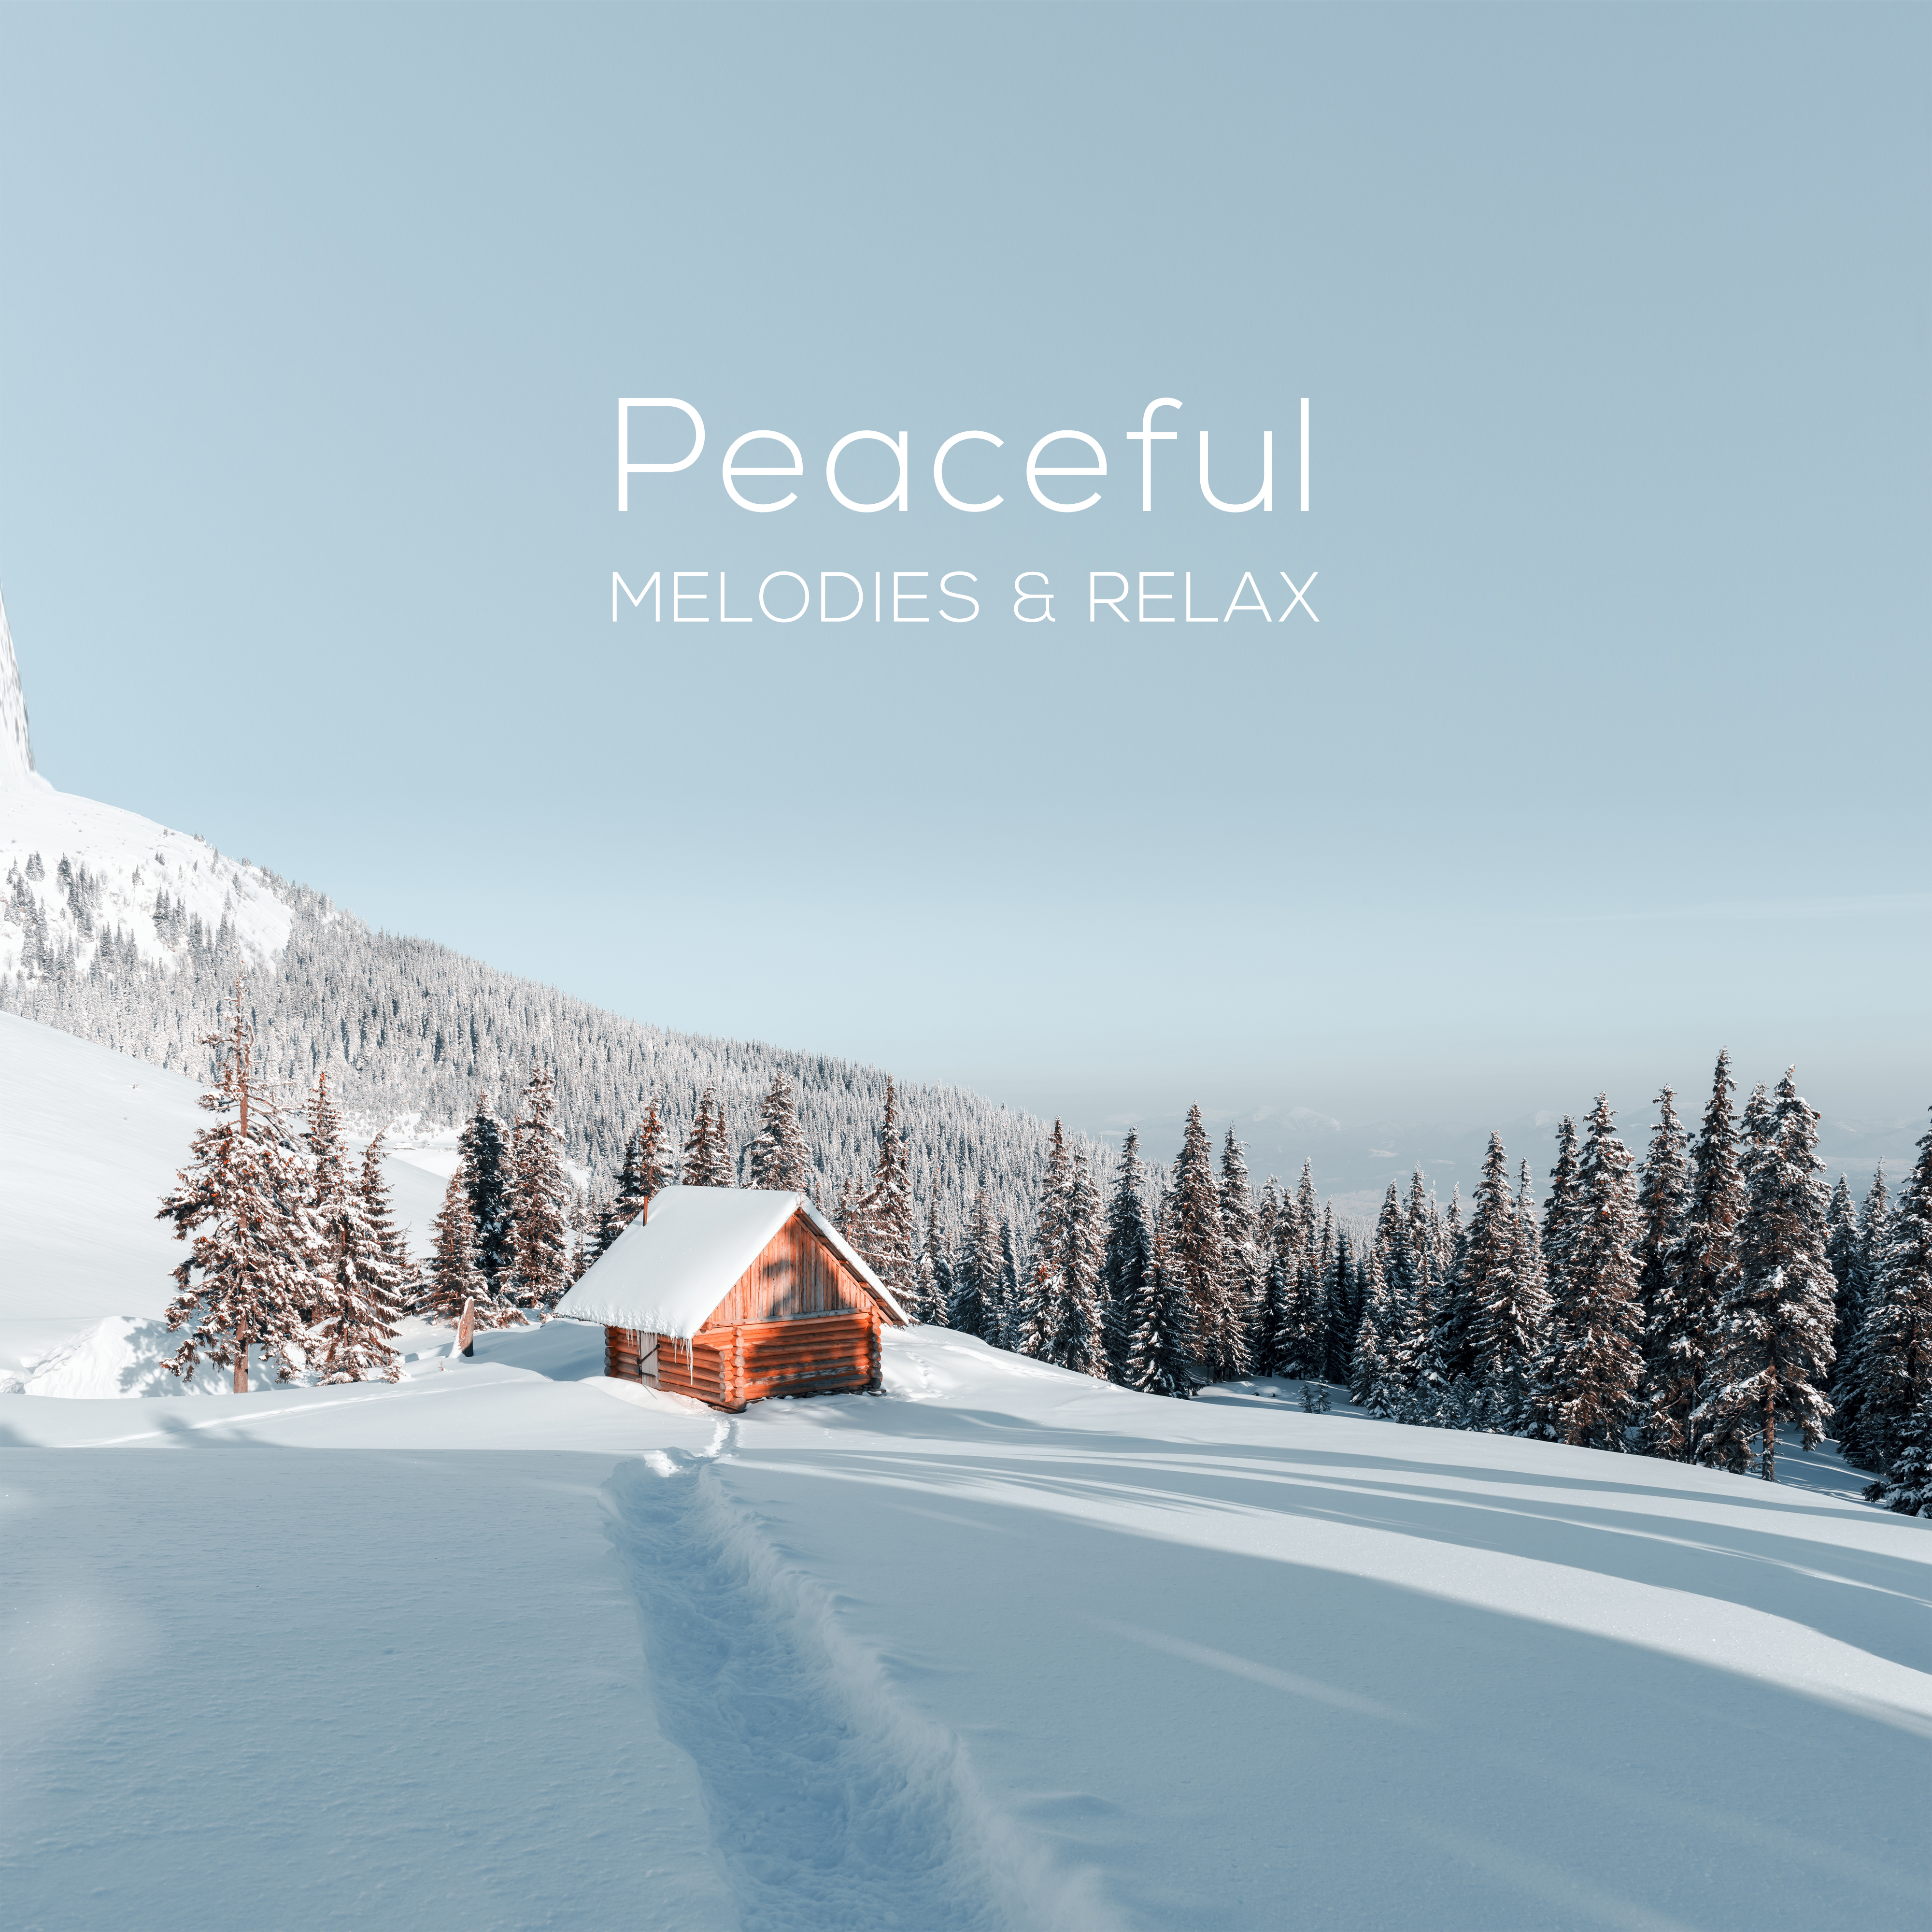 Peaceful Melodies & Relax